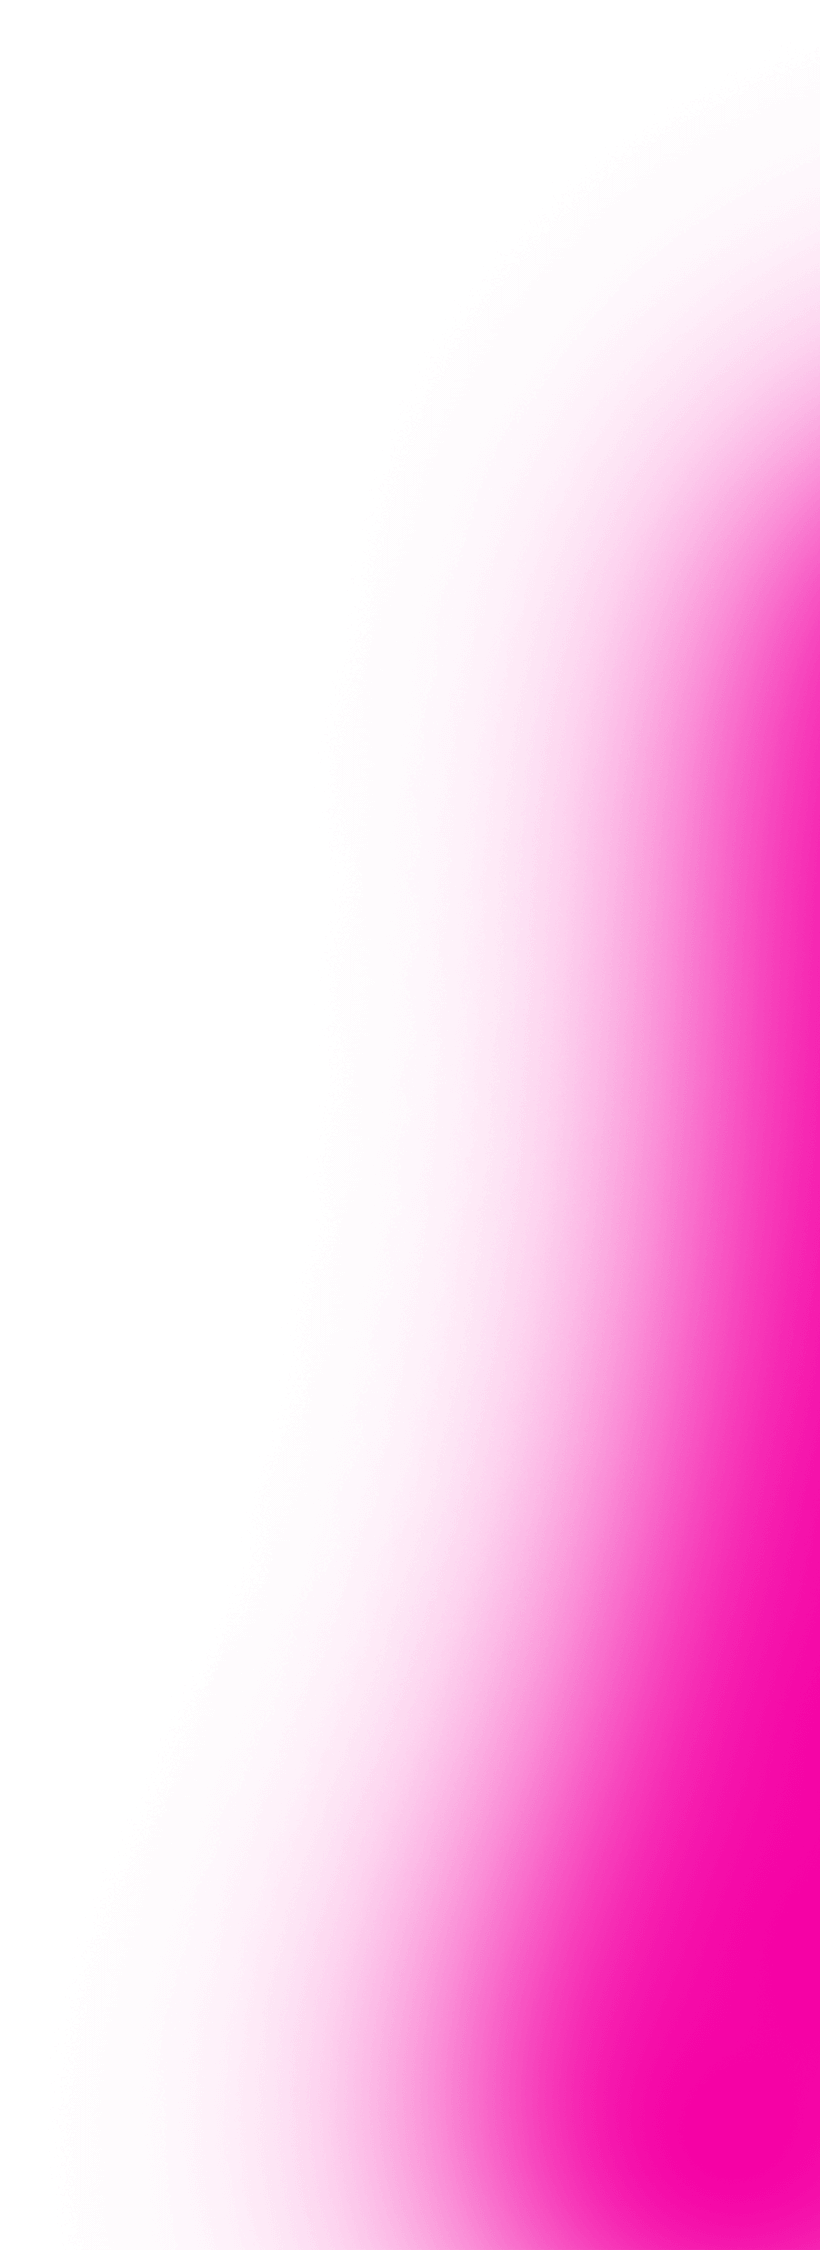 26626-layer-12-16660045586135.png